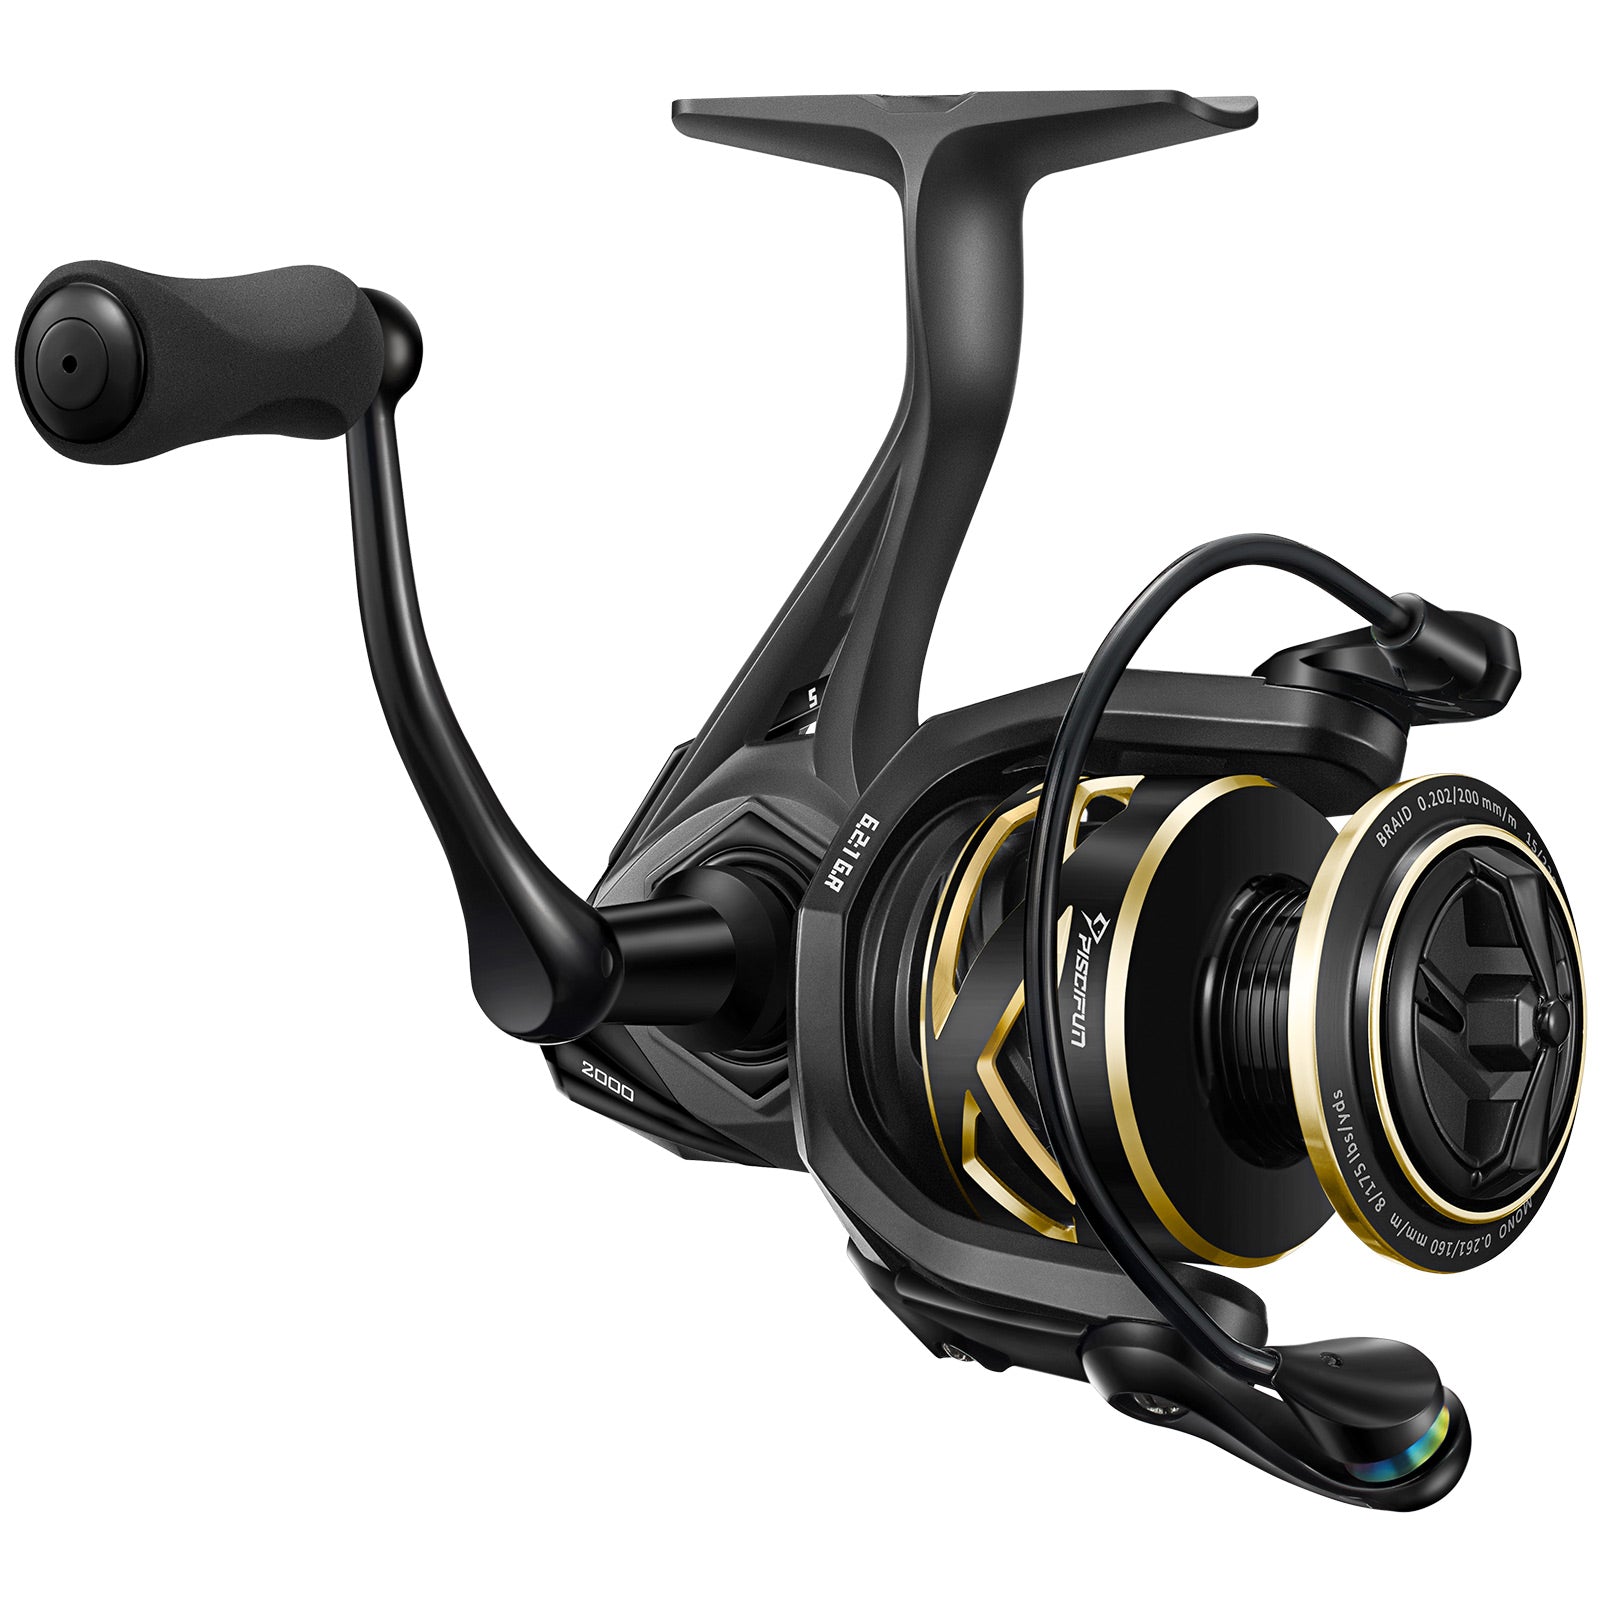 Piscifun® Auric Spinning Reels - Saltwater and Freshwater Spinning Fis, 2000-6.2:1